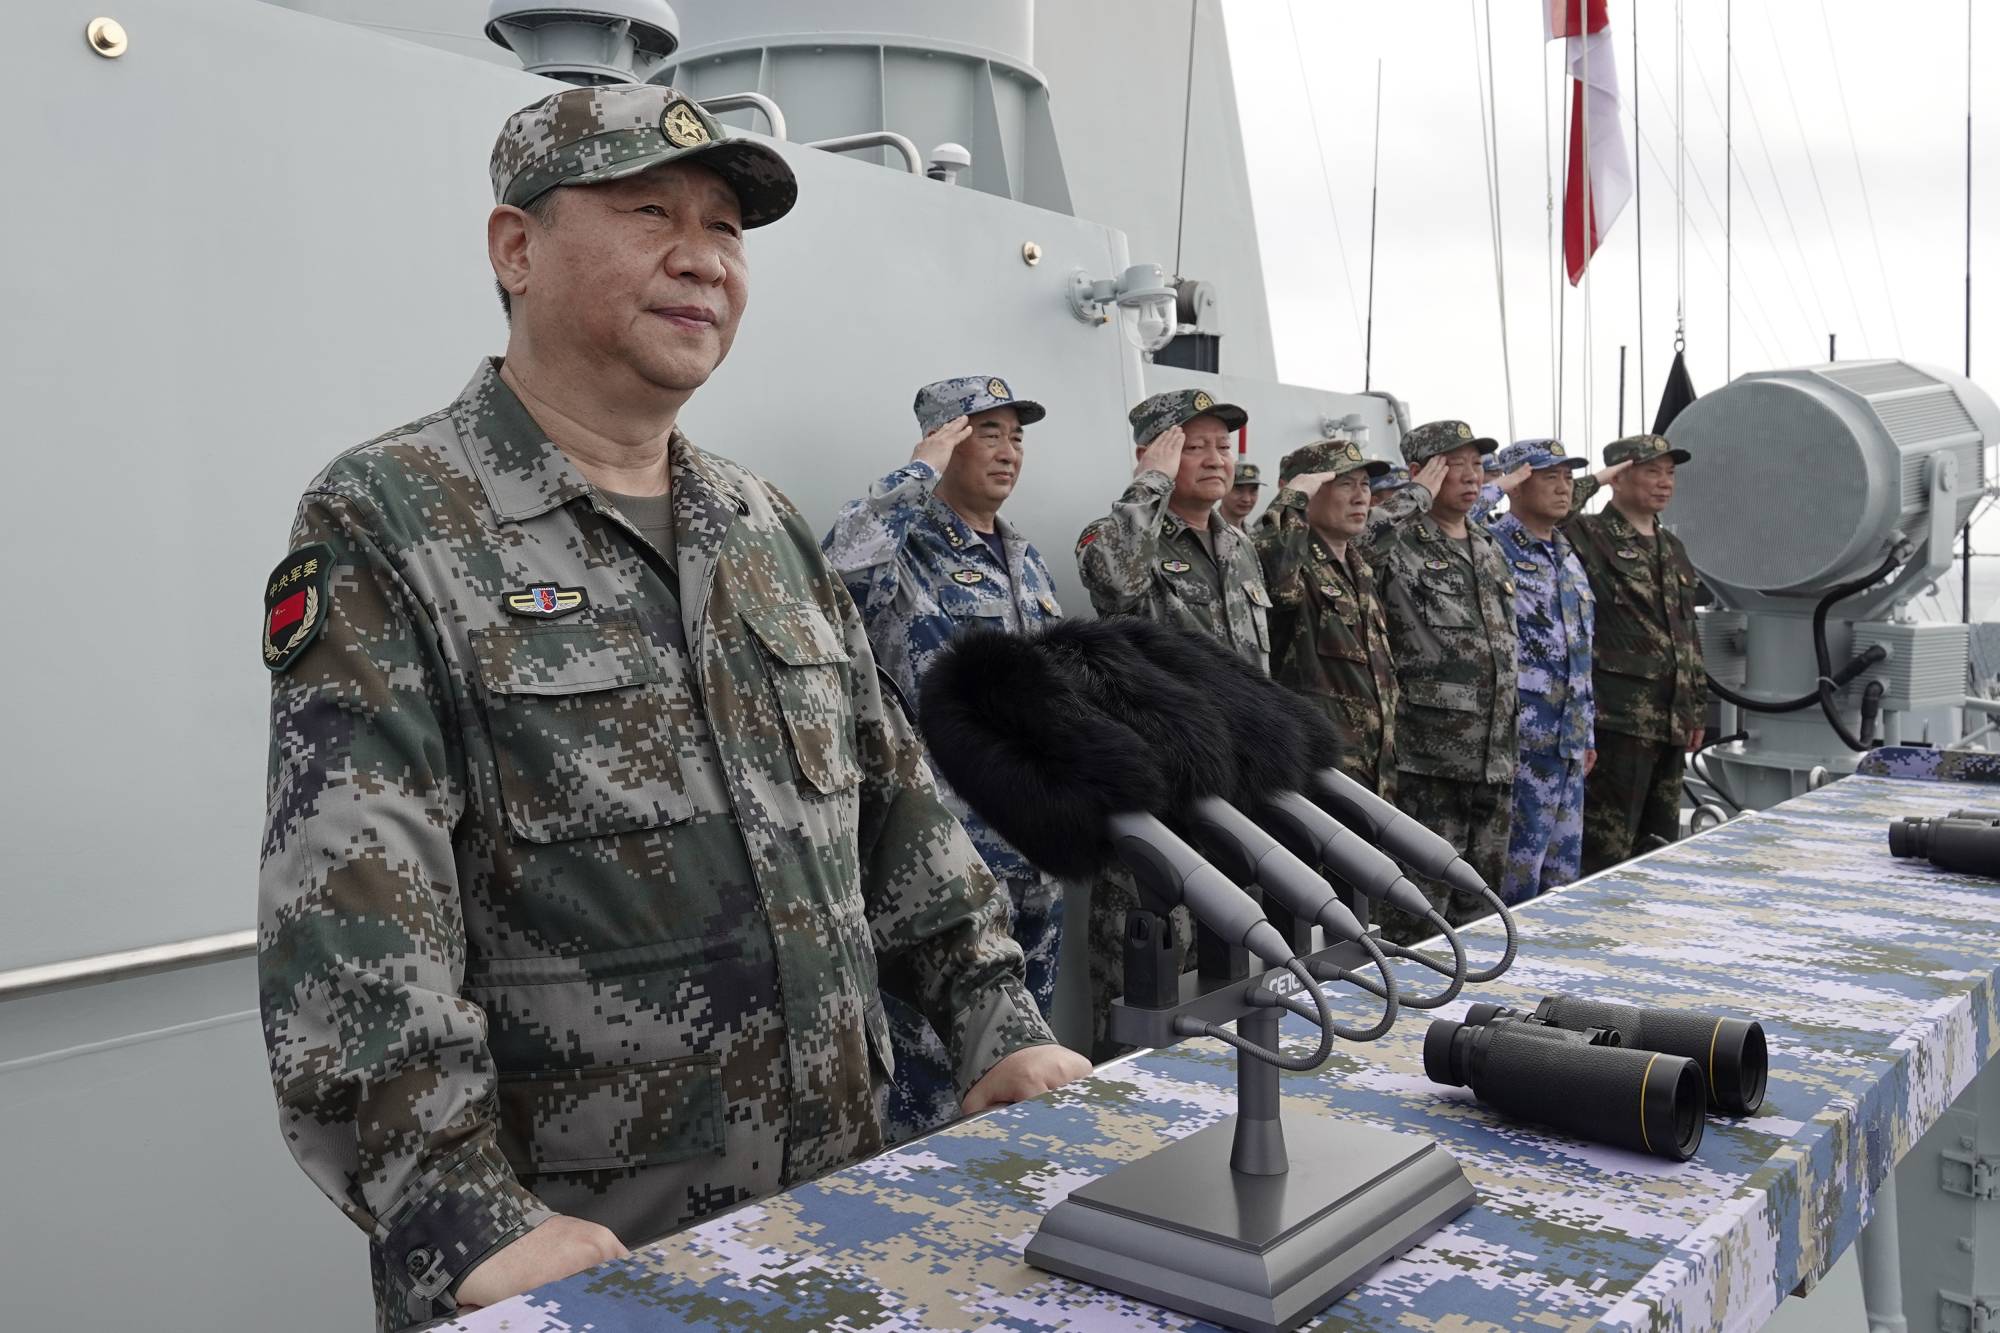 Chinese President Xi Jinping speaks after he reviewed the Chinese People's Liberation Army (PLA) Navy fleet in the South China Sea in 2018. | XINHUA / VIA AP